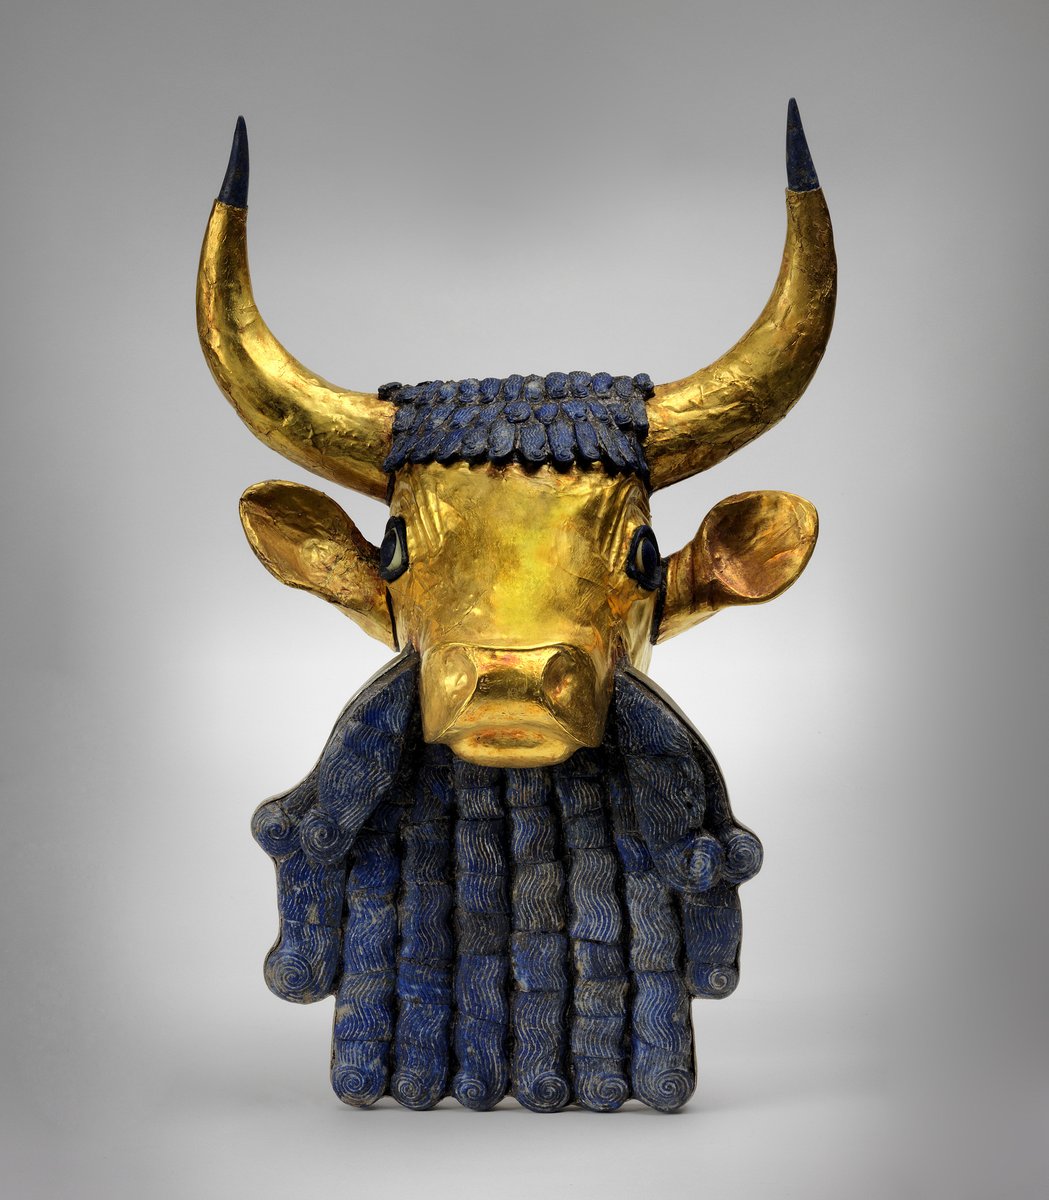 This freeing of Enki happens at the beginning of summer. Summer which starts at the beginning of May, in Taurus...Which is why Shamash is depicted as a golden bull with long flowing "lapis lazuli" (water) beard...